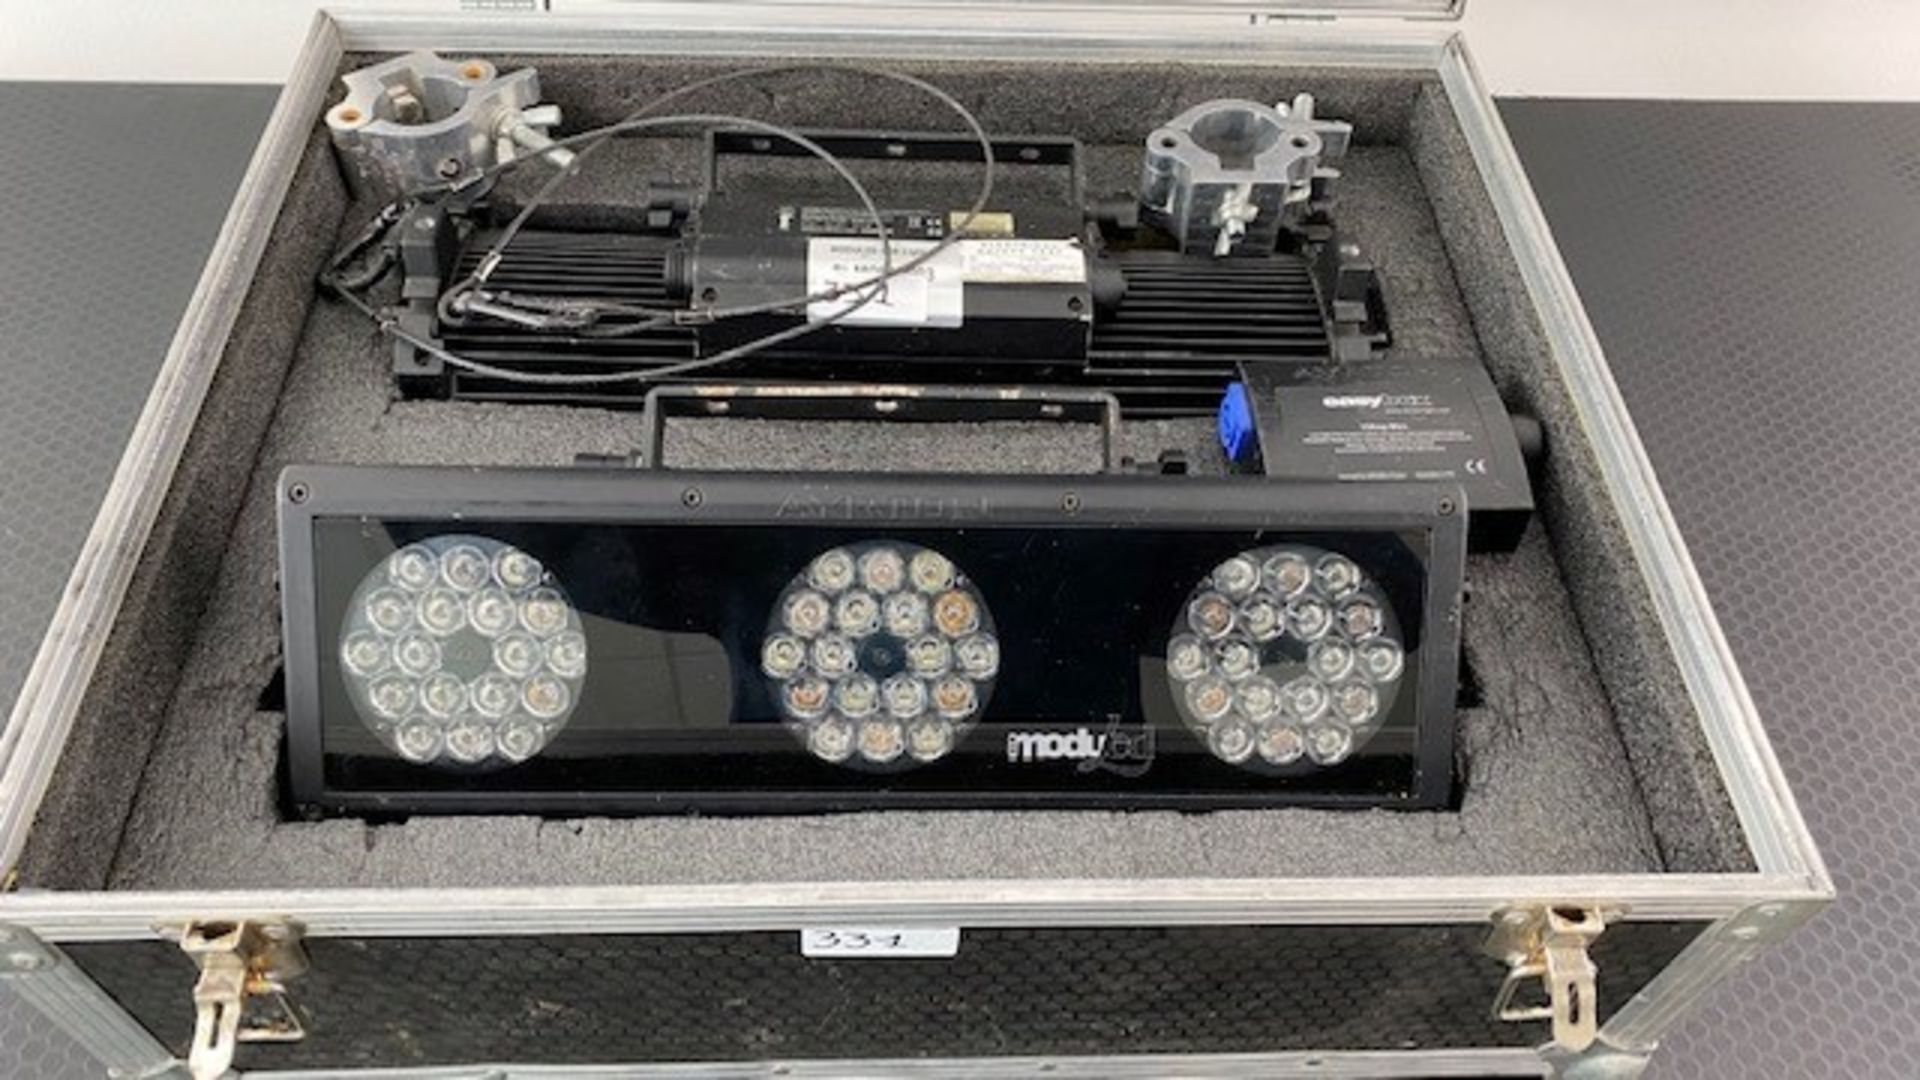 2 x AYRTON Modular Led Lights In Flight Case - Also Includes 2 Half Couplers, 2 Safety Chains & 1 - Image 2 of 3